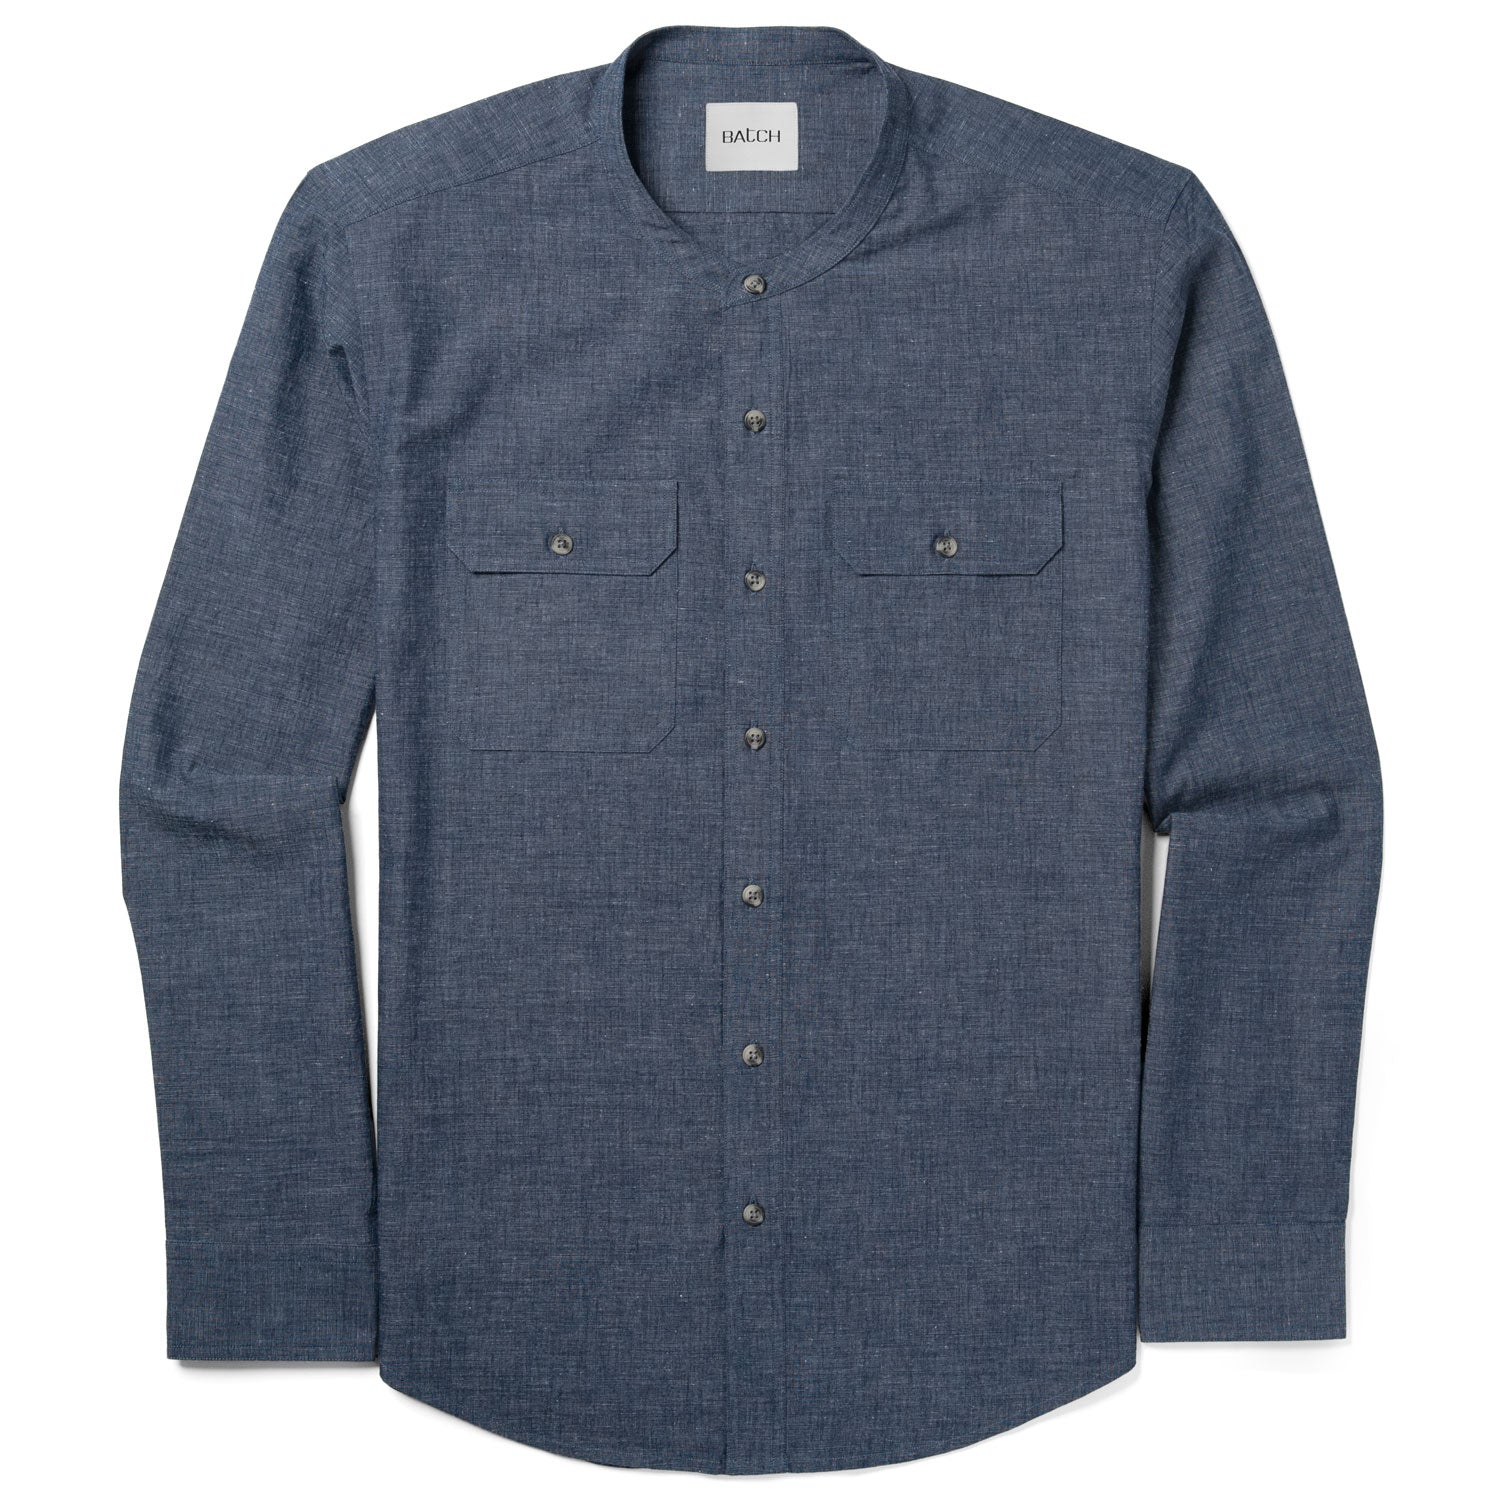 Constructor Band Collar Utility Shirt – Navy Blue End-on-end